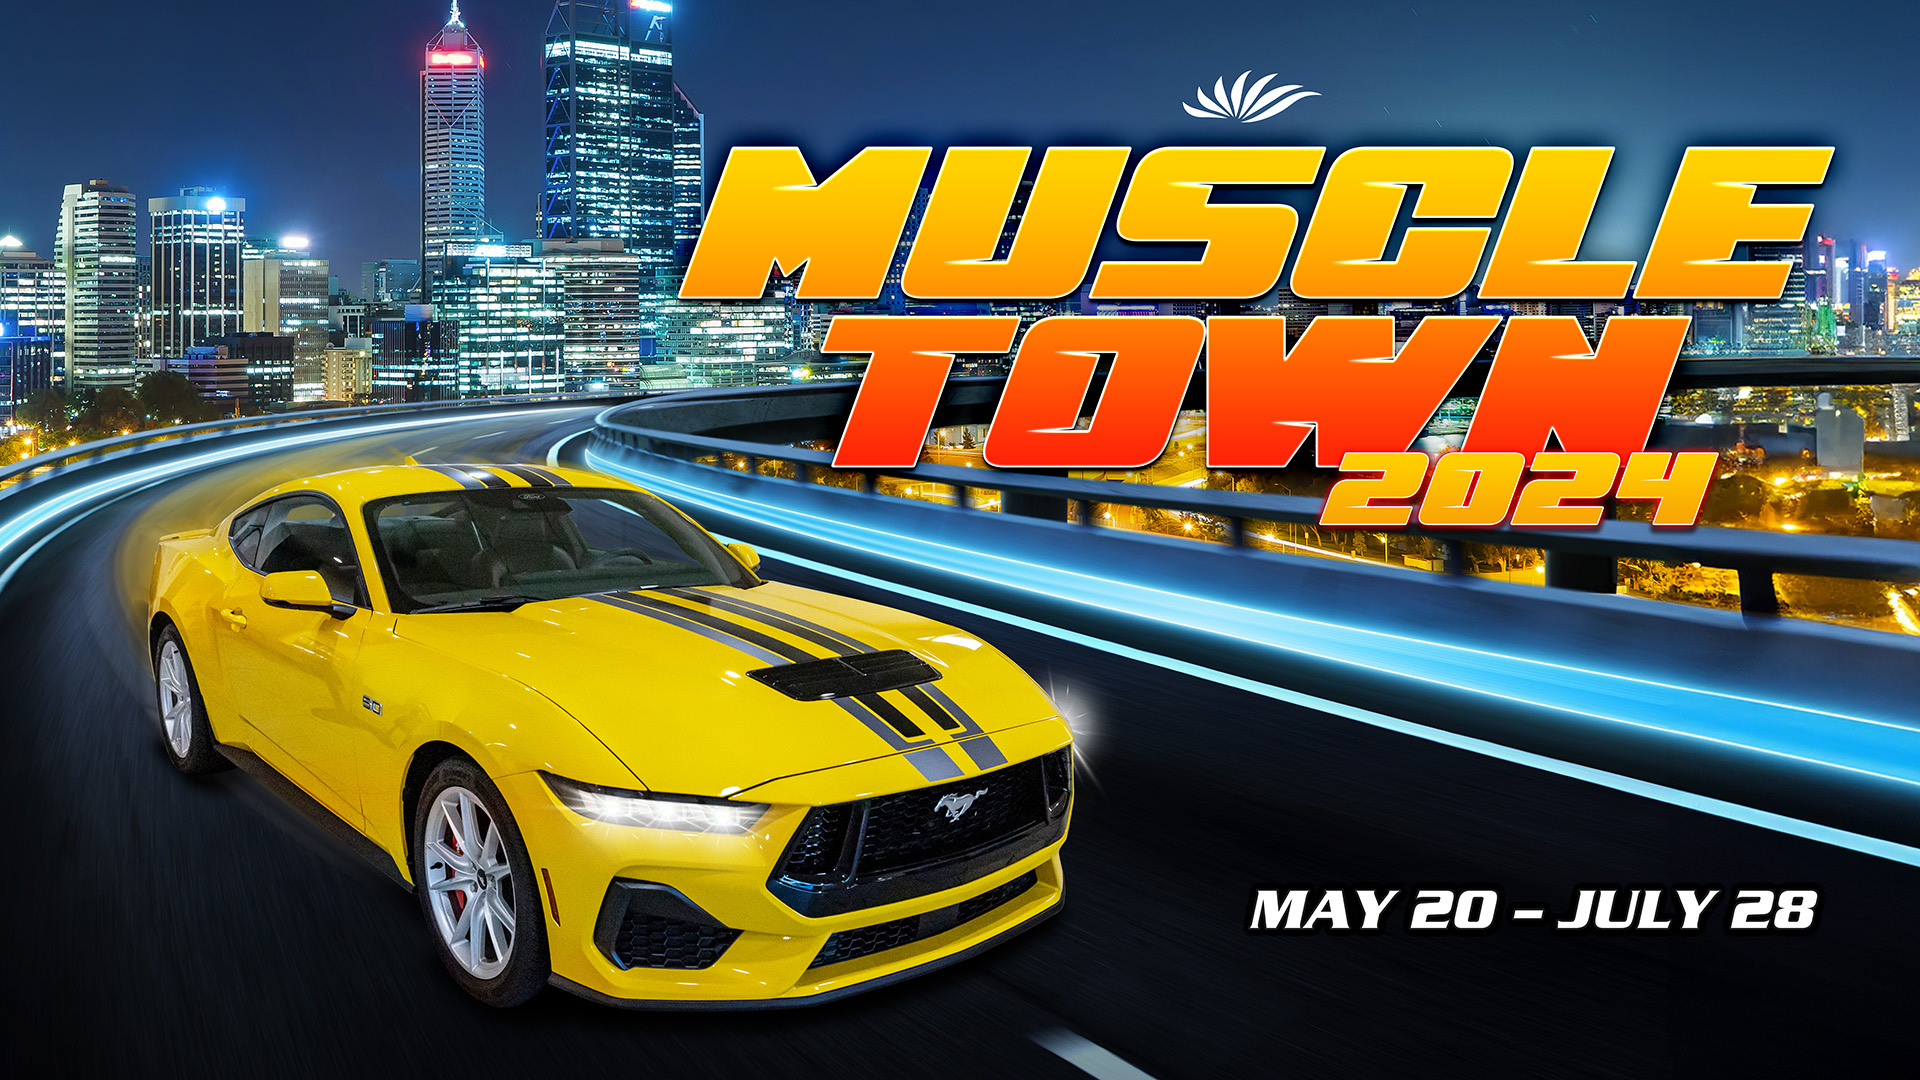 Seven Feathers Casino Resort Is Giving Away A Brand New Ford Mustang To One Lucky Winner This Summer